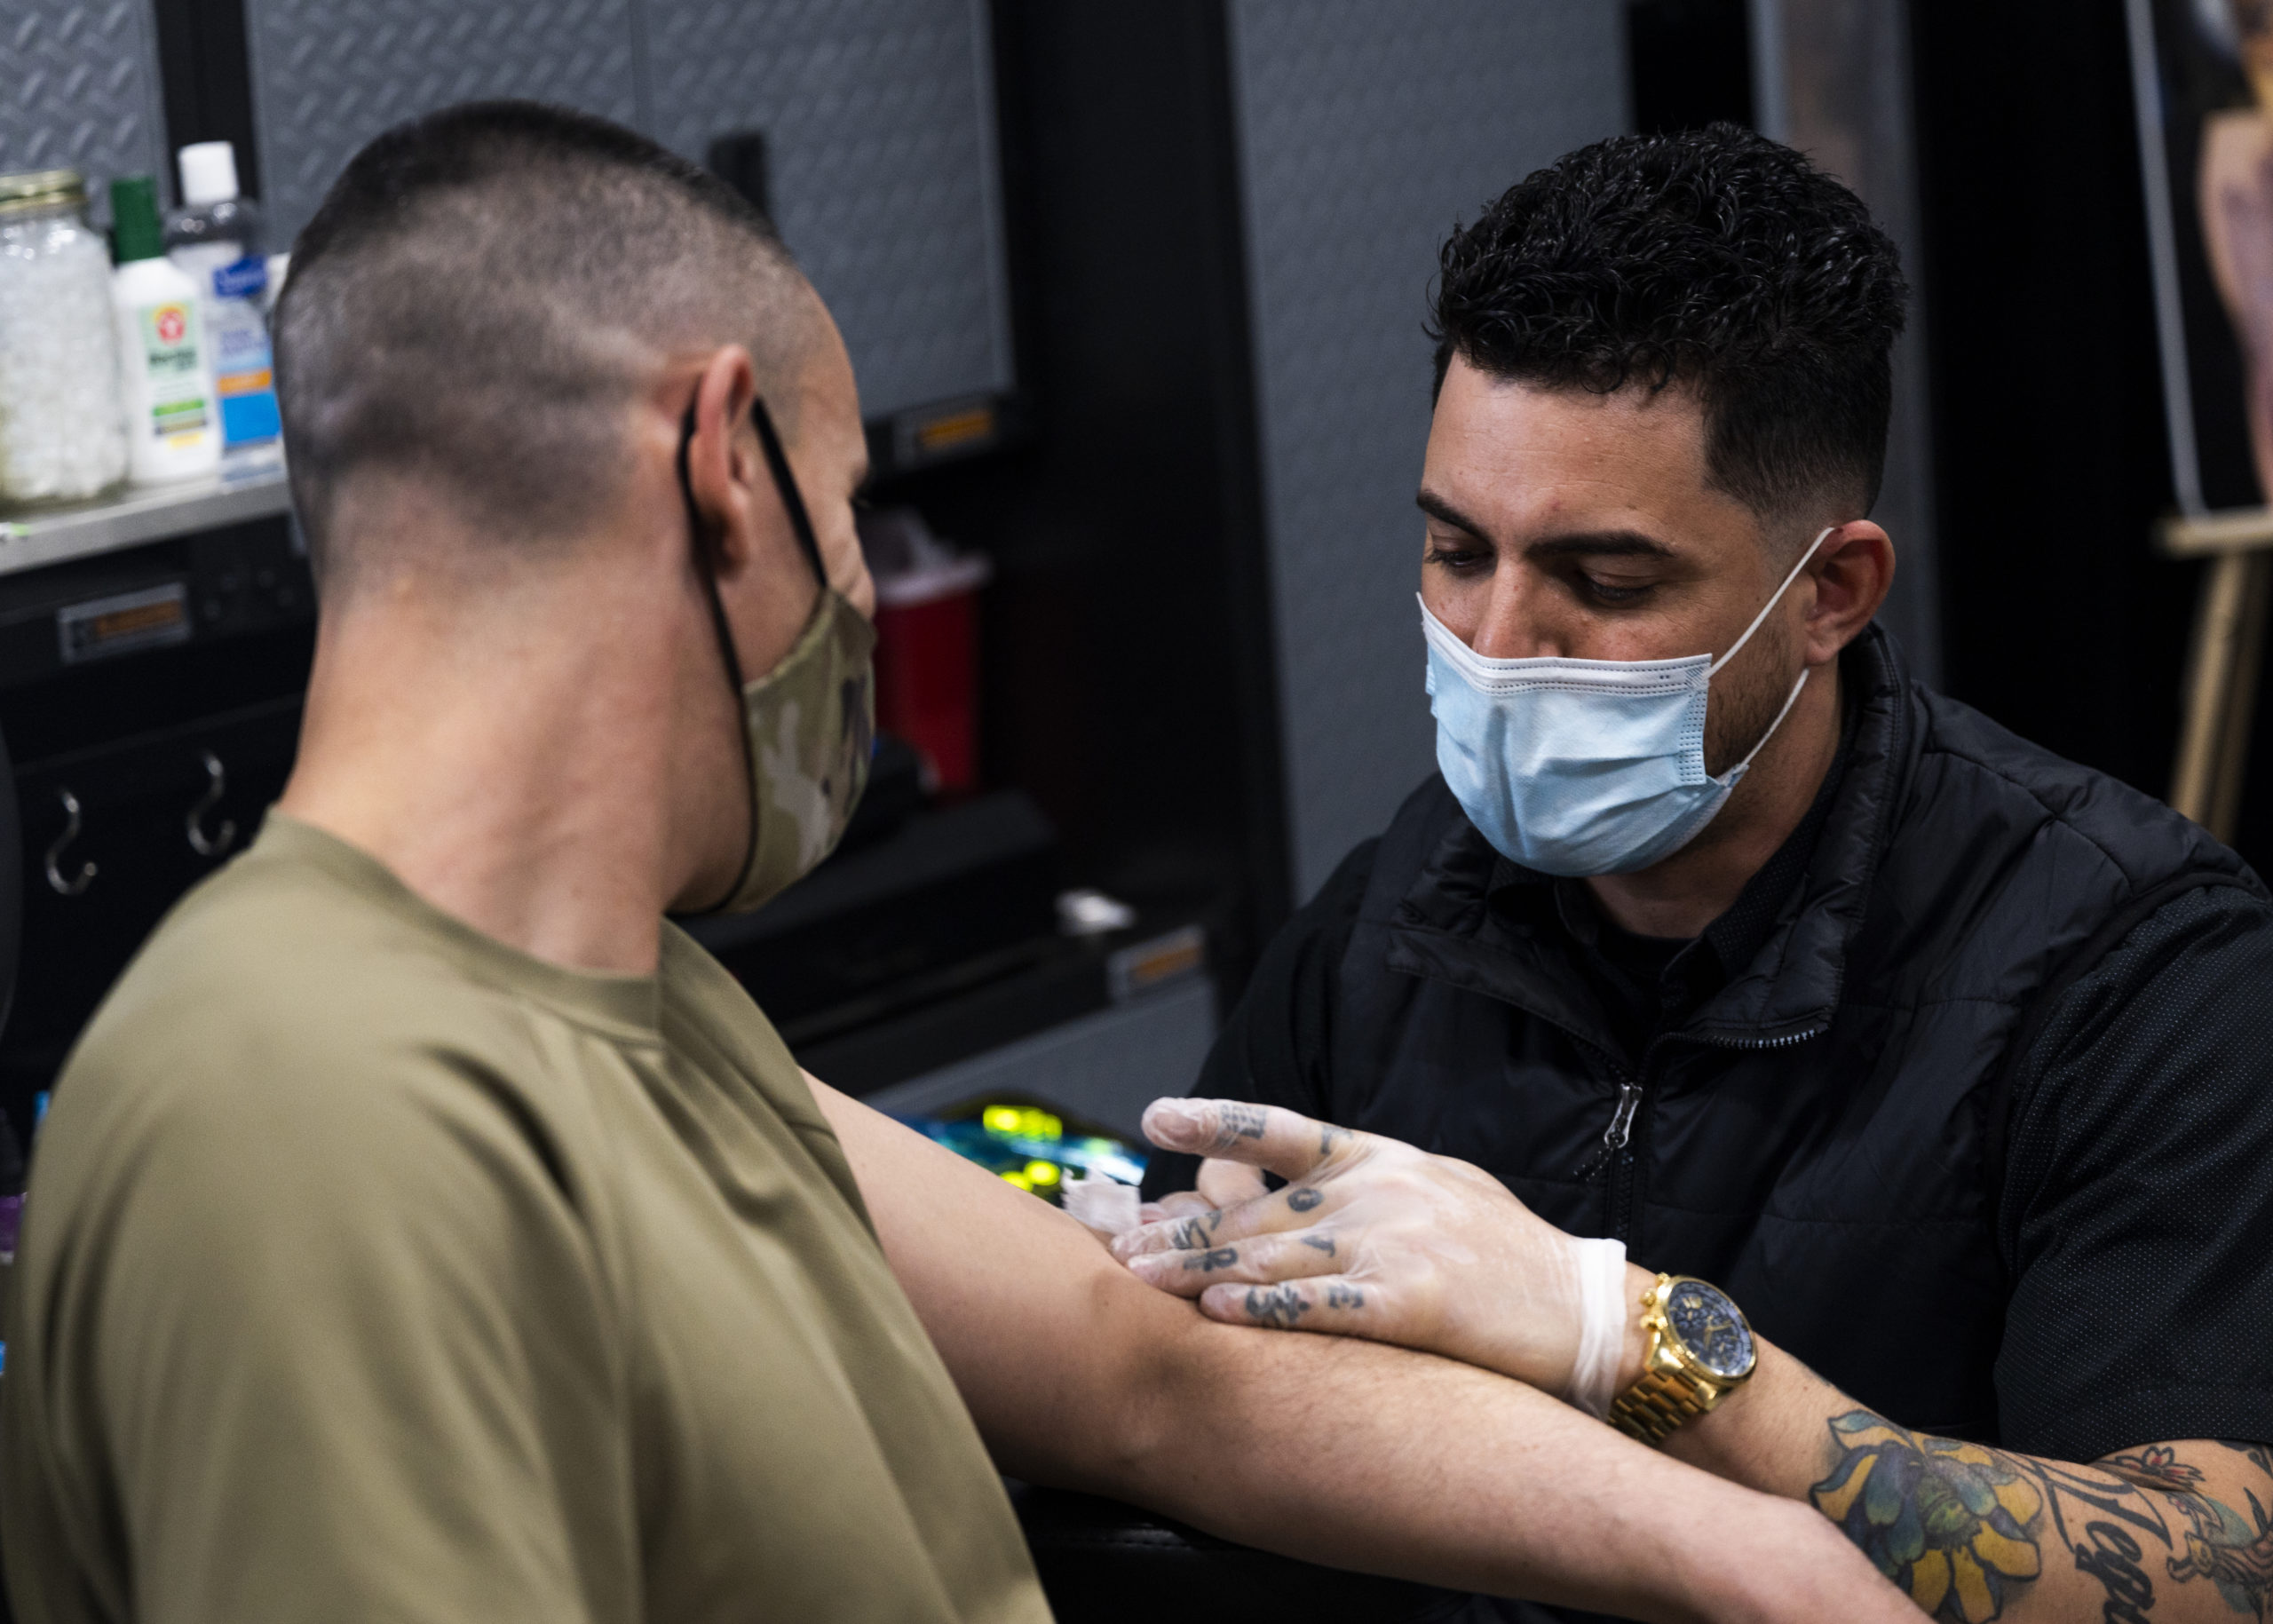 From Tattoos to Training How Recent Changes Policy are Reshaping the Marine  Corps  MCRD San Diego CA  Staff Sergeant Mary Phaly  Morning Owl Fine  Art Photography